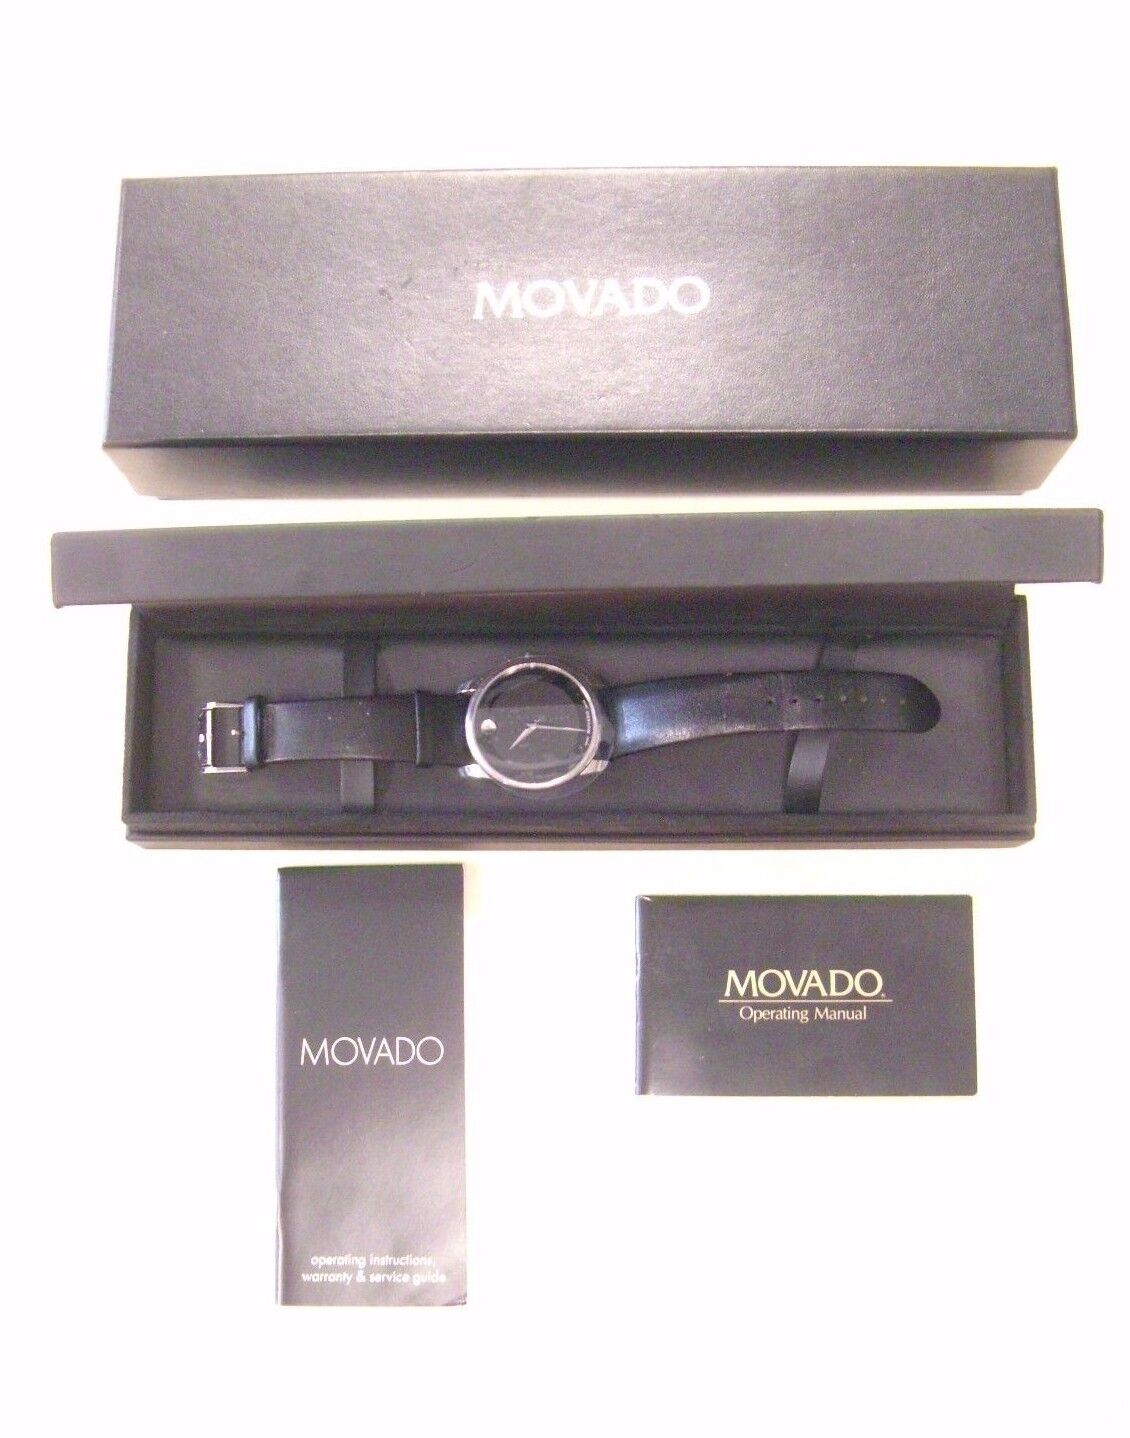 Movado Luxury Mens Watch Black Face 07.1.14.1142 Museum 40mm 